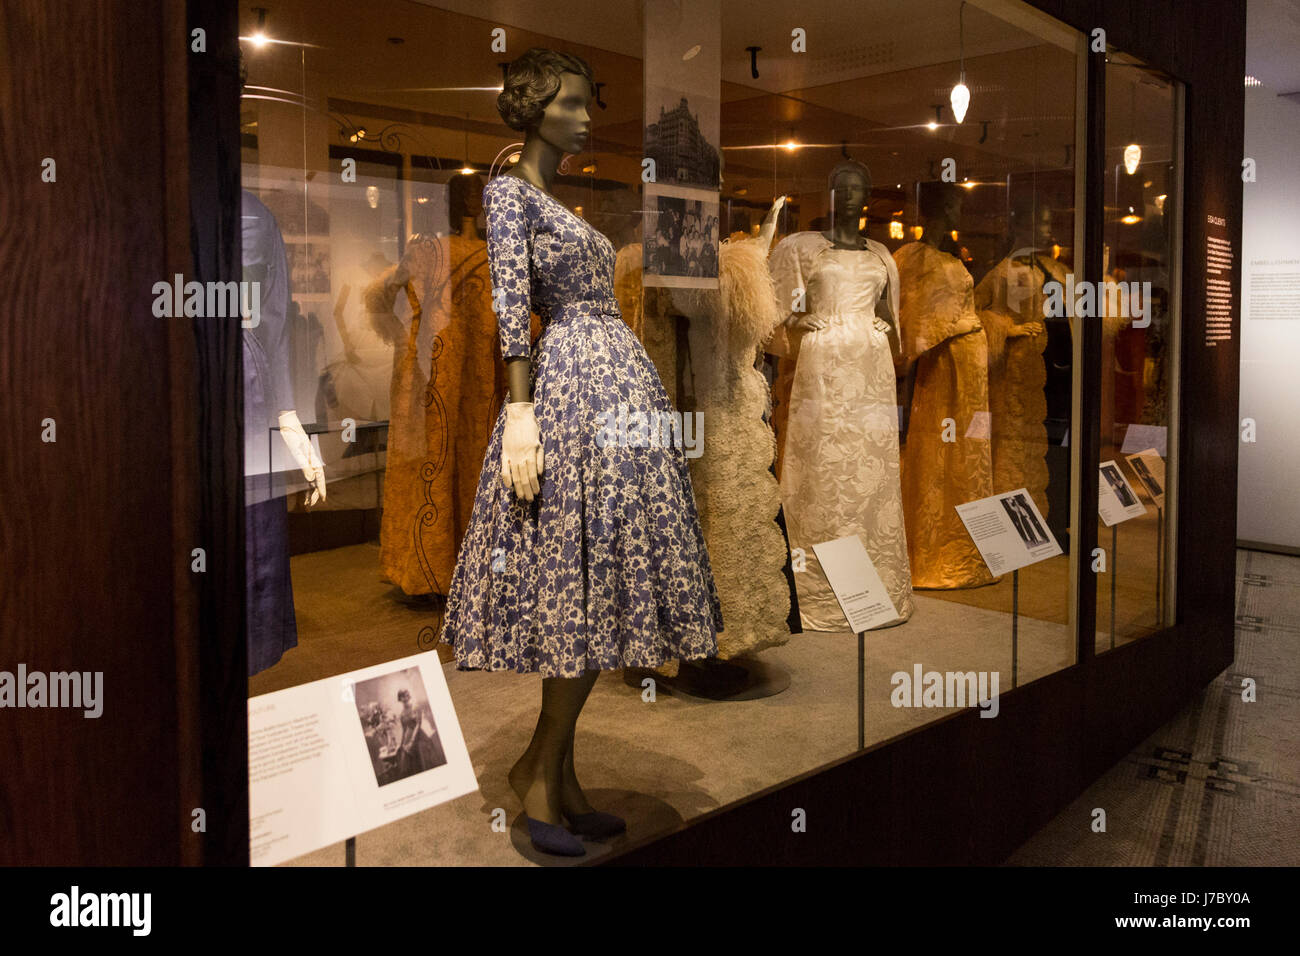 London, UK. 24 May 2017. The V&A Museum presents the exhibition Stock Photo  - Alamy